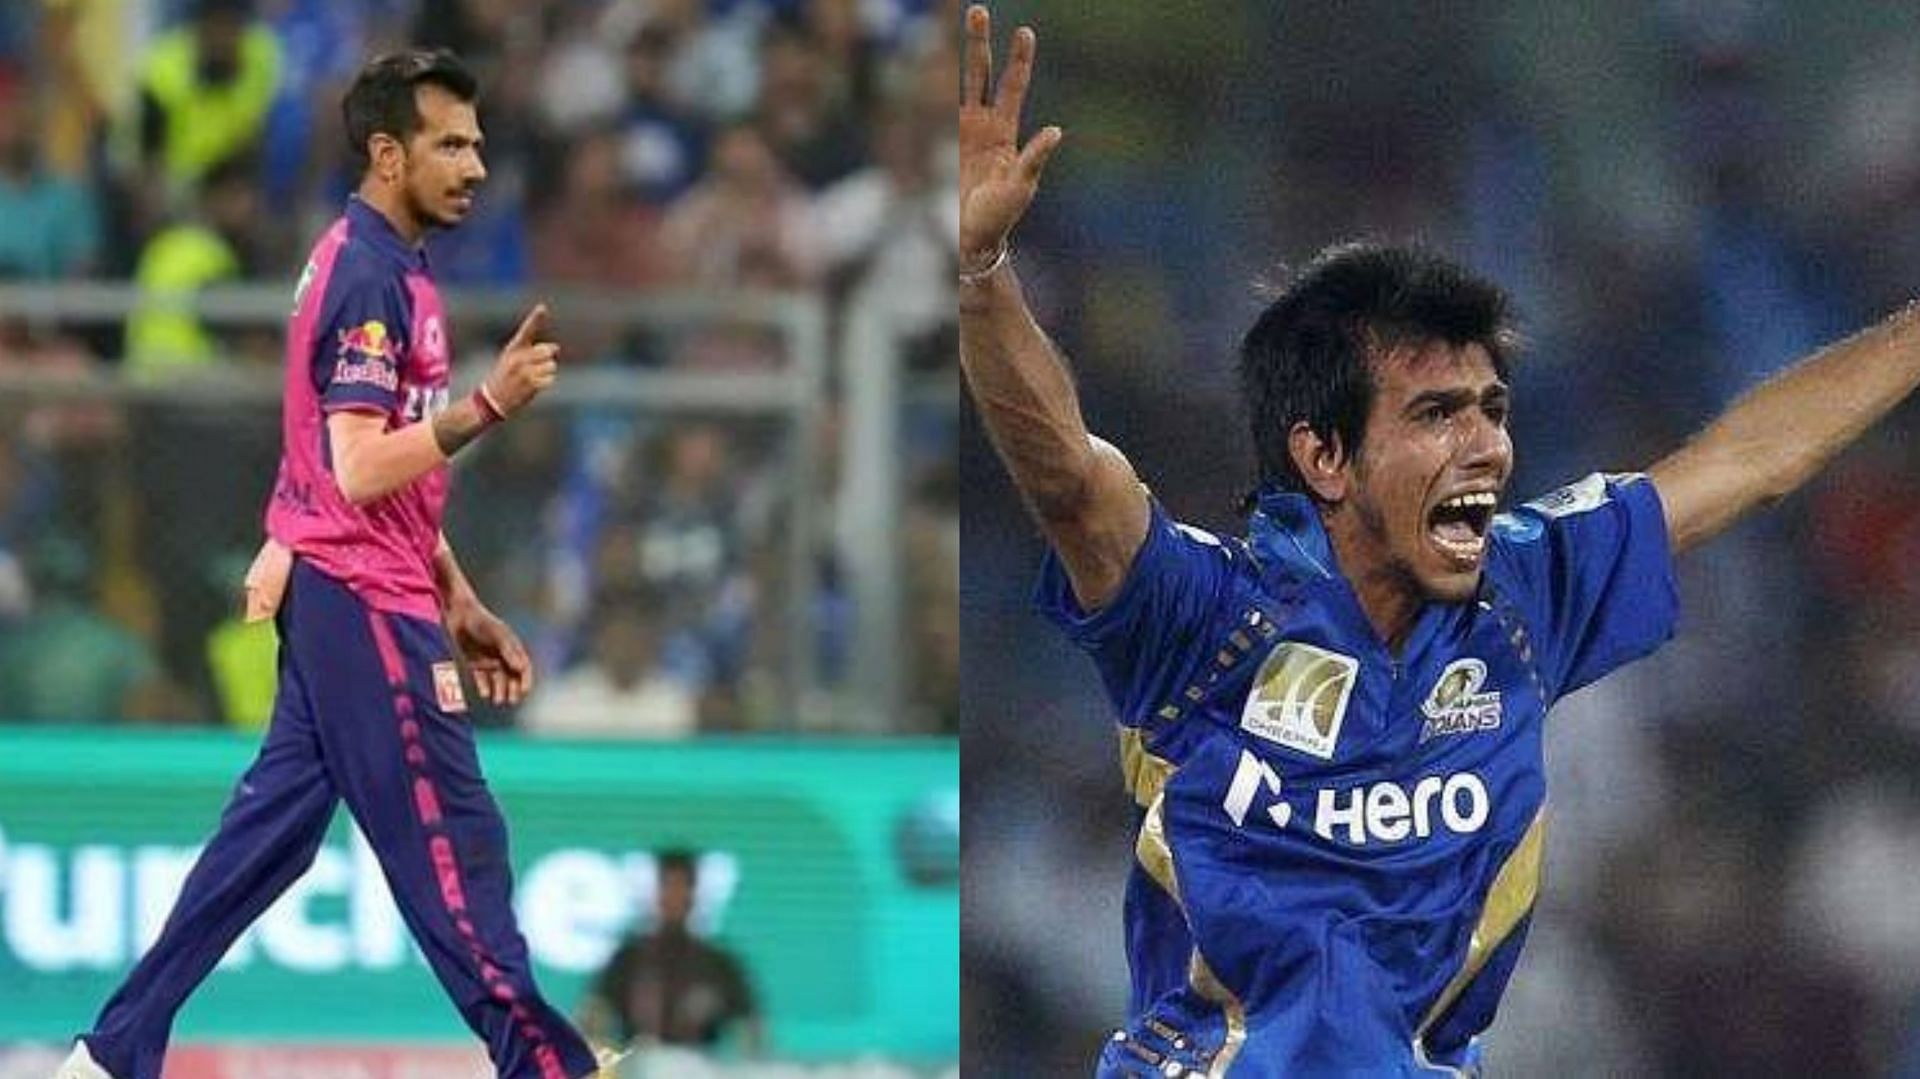 Yuzvendra Chahal loves playing against his former IPL team